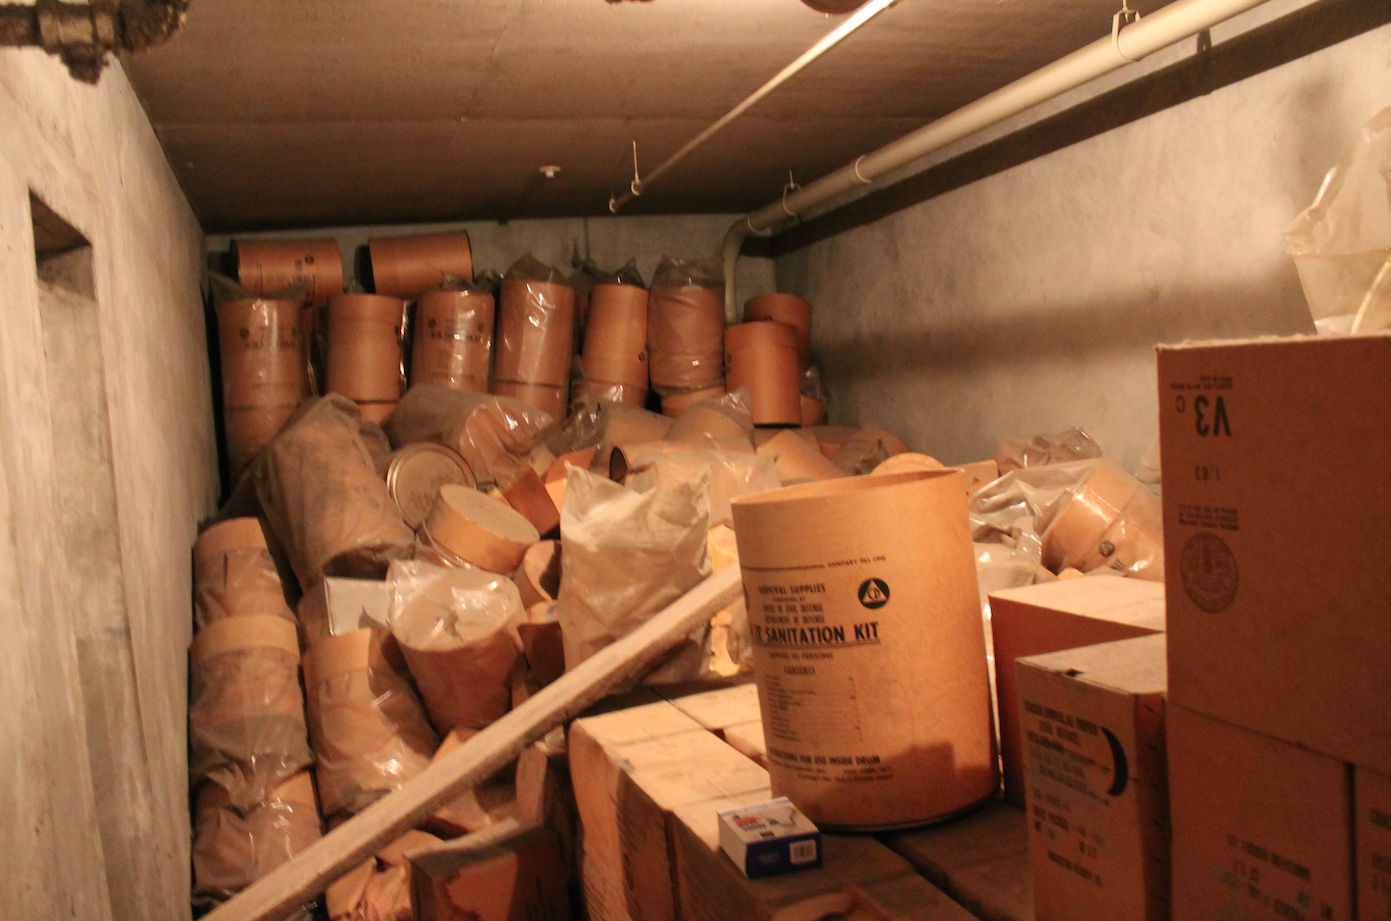 |<image-caption></p>
<p>The view from inside City Hall’s stash of rations and supplies for the aftermath o|The Boston Courant” title=”|<image-caption>
<p>The view from inside City Hall’s stash of rations and supplies for the aftermath o|The Boston Courant” /></div>
<p><!-- END scald=2545 --></div>
</div>
<p>“I’m just not that brave,” she told Metro. “I think, you know, 10 years expired is too long. Fifty years, you’re just taking your life in your hands.”</p>
<p>Boston isn’t alone in squirreling away fallout food, now going ultra-stale and tempting taste-testers, said David Monteyne, a professor at the University of Calgary, who wrote a book on the subject. Many, many buildings have them, the products of the massive federal civil defense program that launched in the 1950s, he said.</p>
<p>Moving them from forgotten basements and storage closets is heavy and inconvenient work, so they tend to stick around, he said.
<p><i><b>RELATED: <a href=